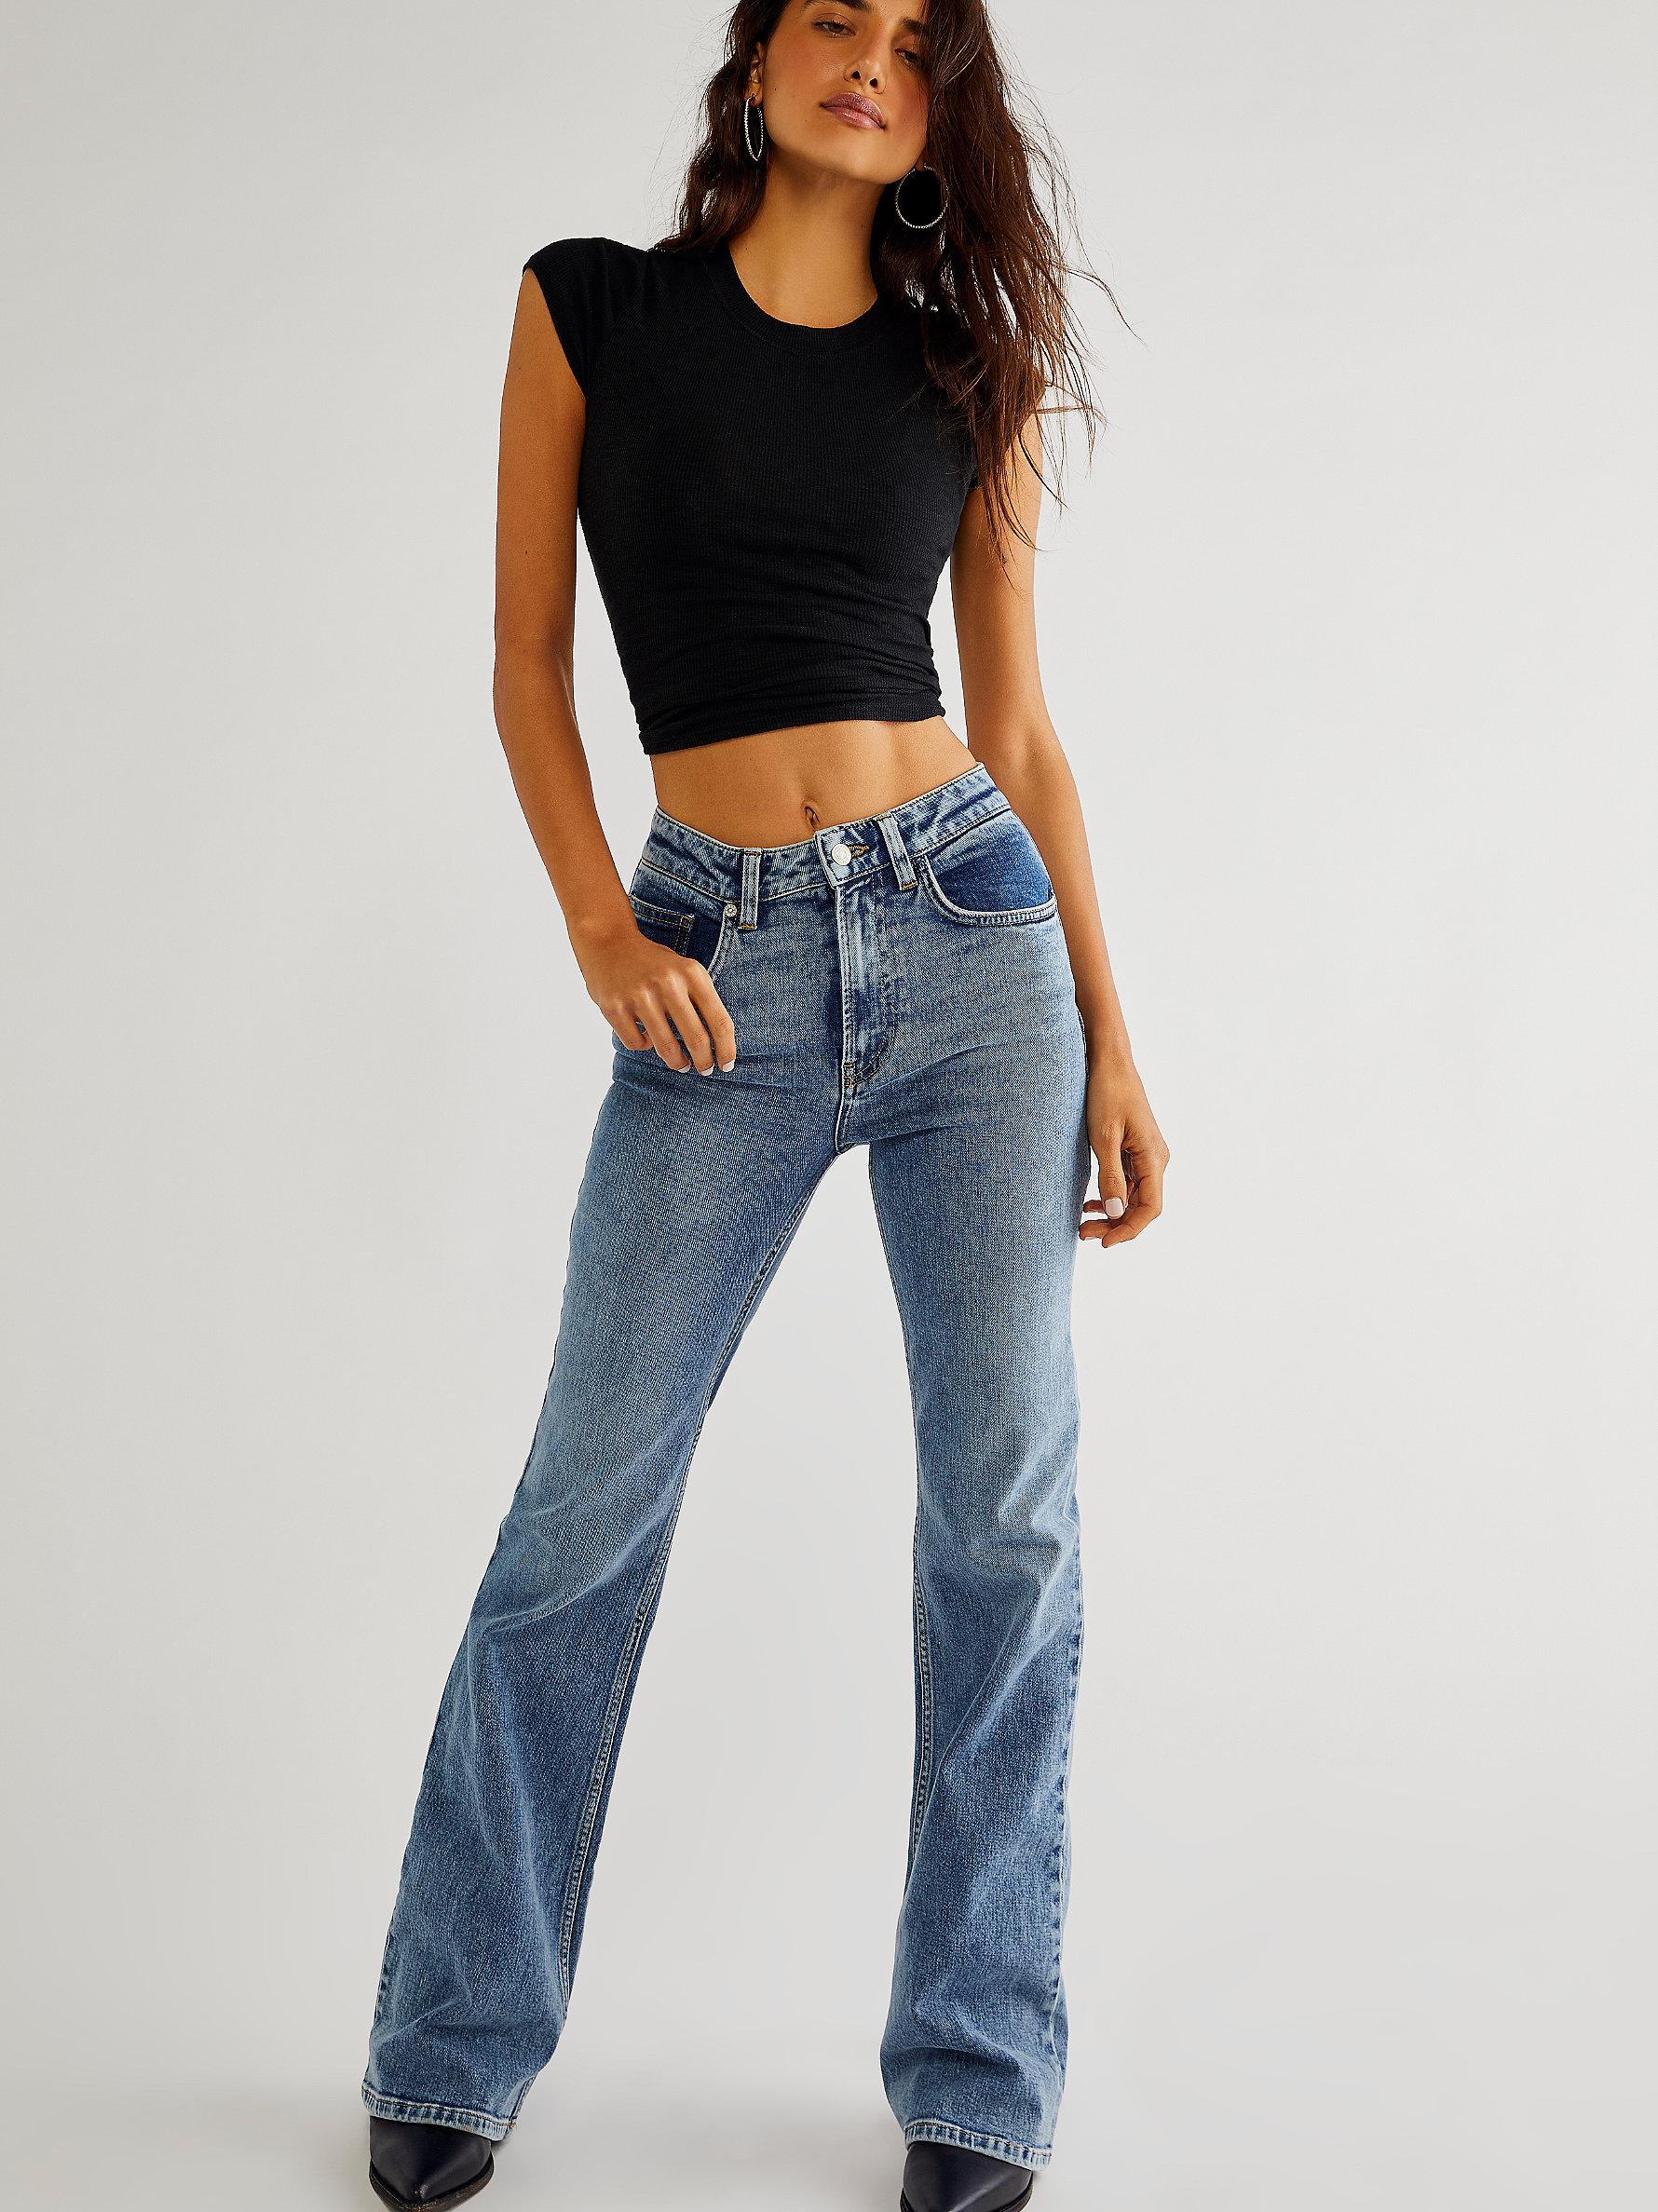 https://cdna.lystit.com/photos/freepeople/4a7741fe/free-people-Electric-Pink-Thunderbird-Flare-Jeans.jpeg